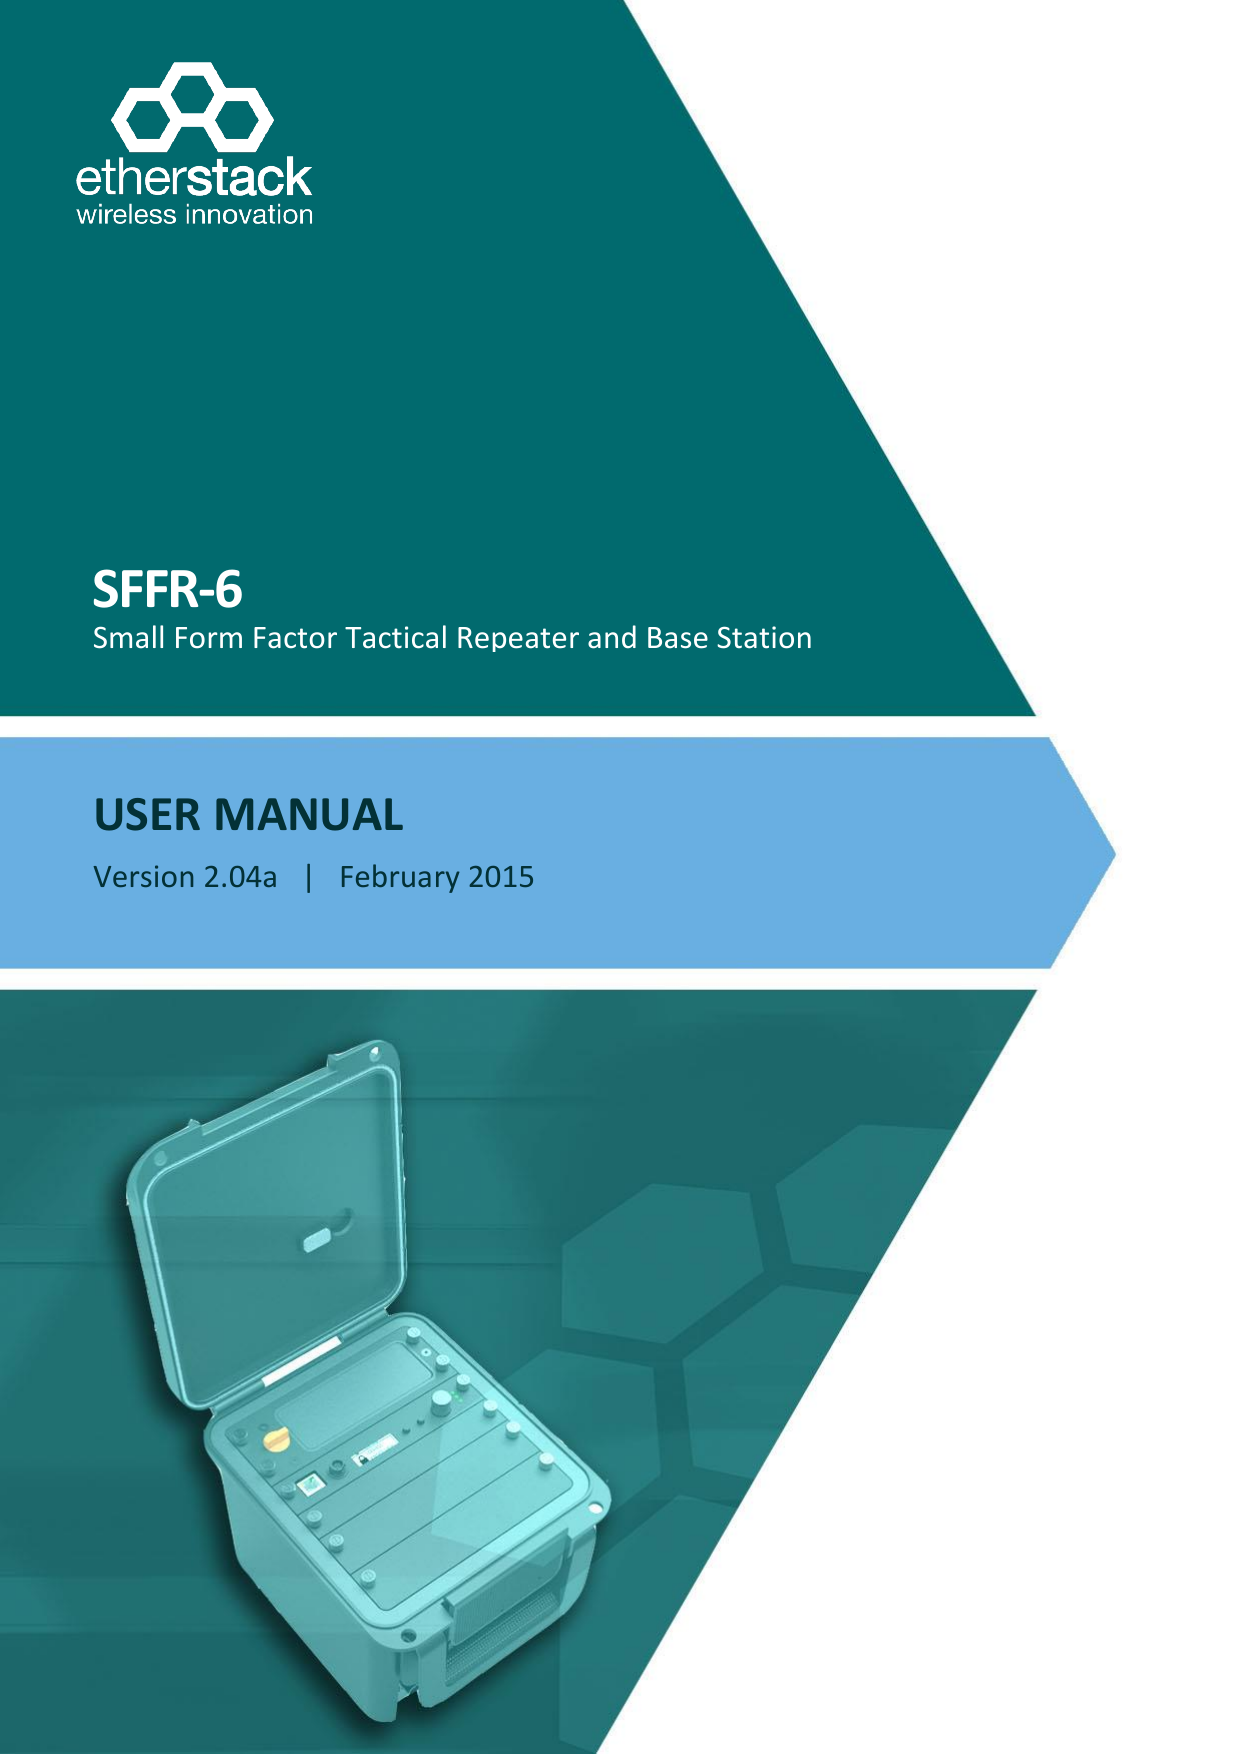  SFFR-6 User Manual    SFFR-6 USER MANUAL Version 2.04a   |   February 2015    Small Form Factor Tactical Repeater and Base Station 